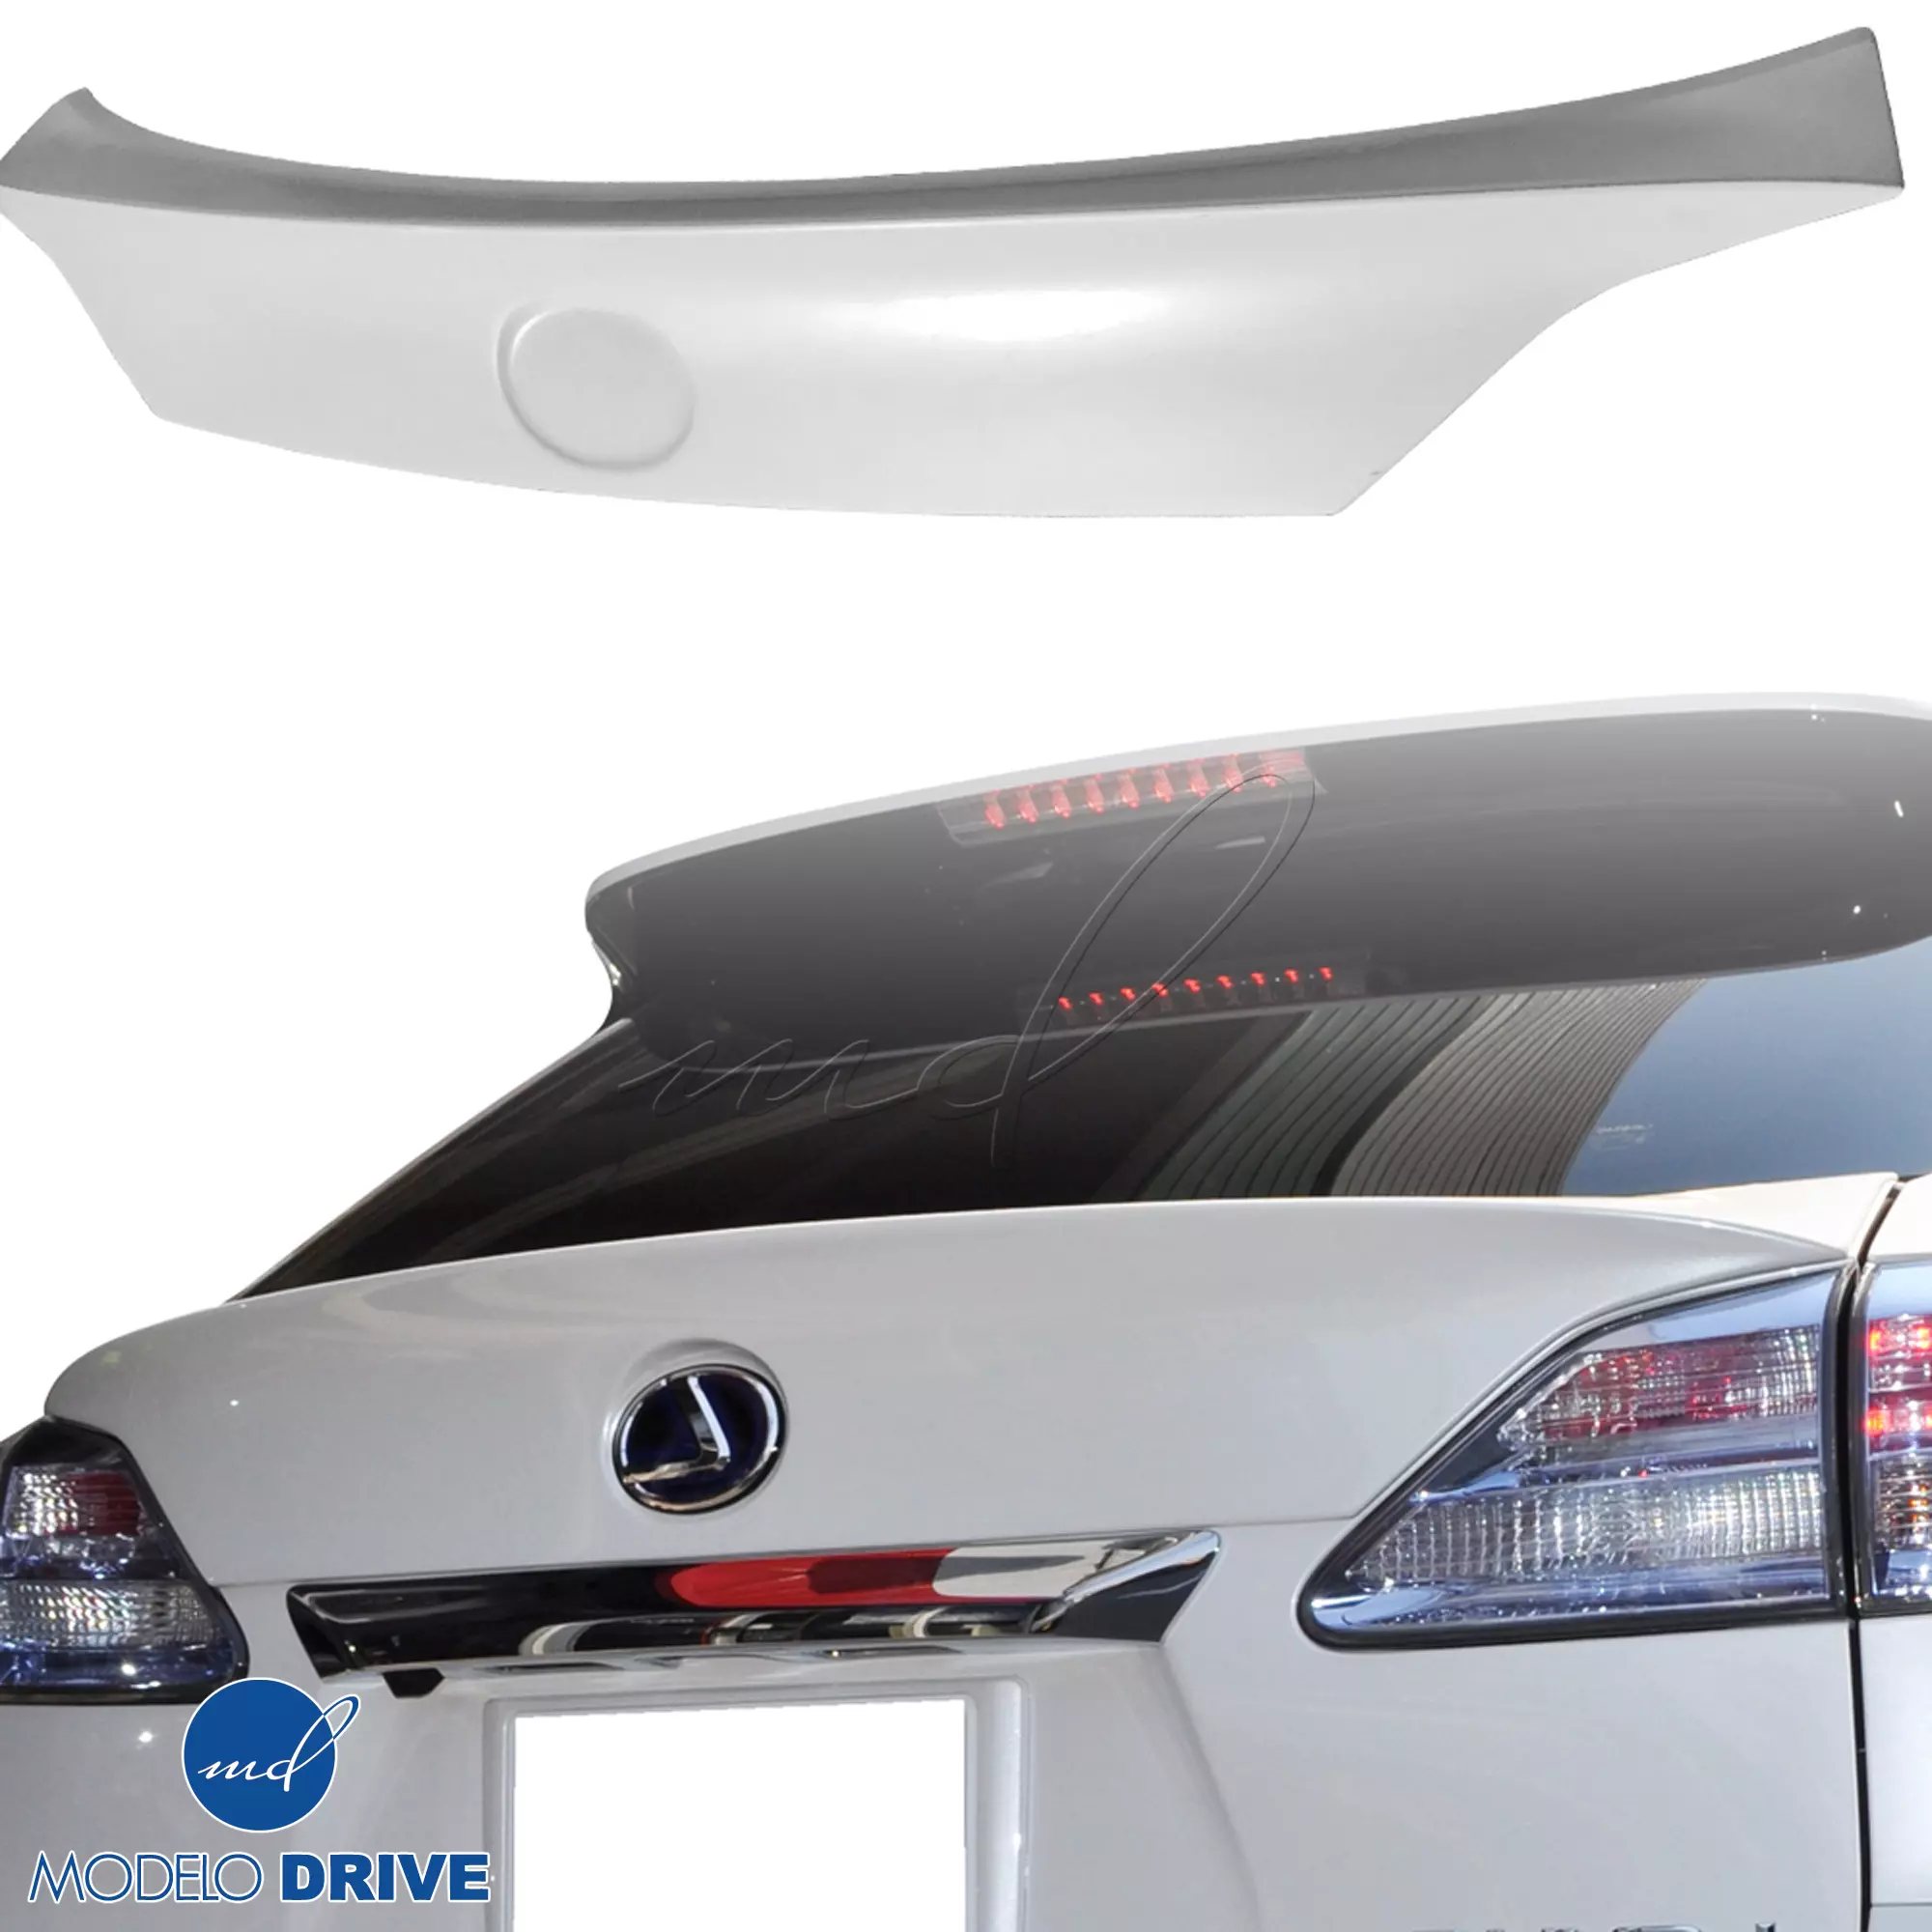 ModeloDrive FRP WAL BISO Spoiler Wing > Lexus RX-Series RX350 RX450 2010-2013 - Image 1